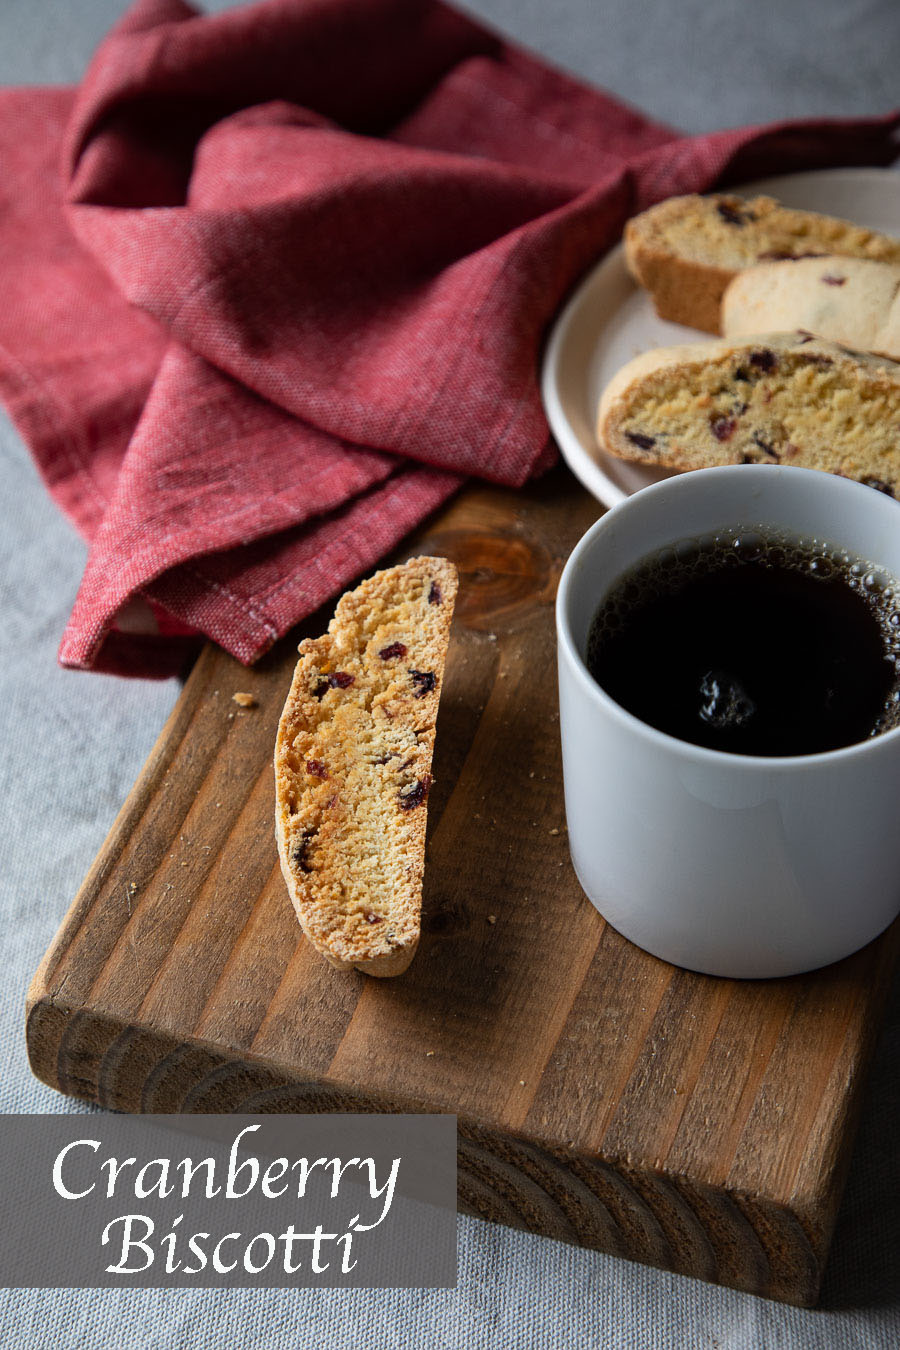 Cranberry Biscotti Recipe. A healthy biscotti recipe perfect for coffee or tea. This recipe is inspired by Italian cookies and are perfect for a snack. #lmrecipes #cookies #biscotti #baking